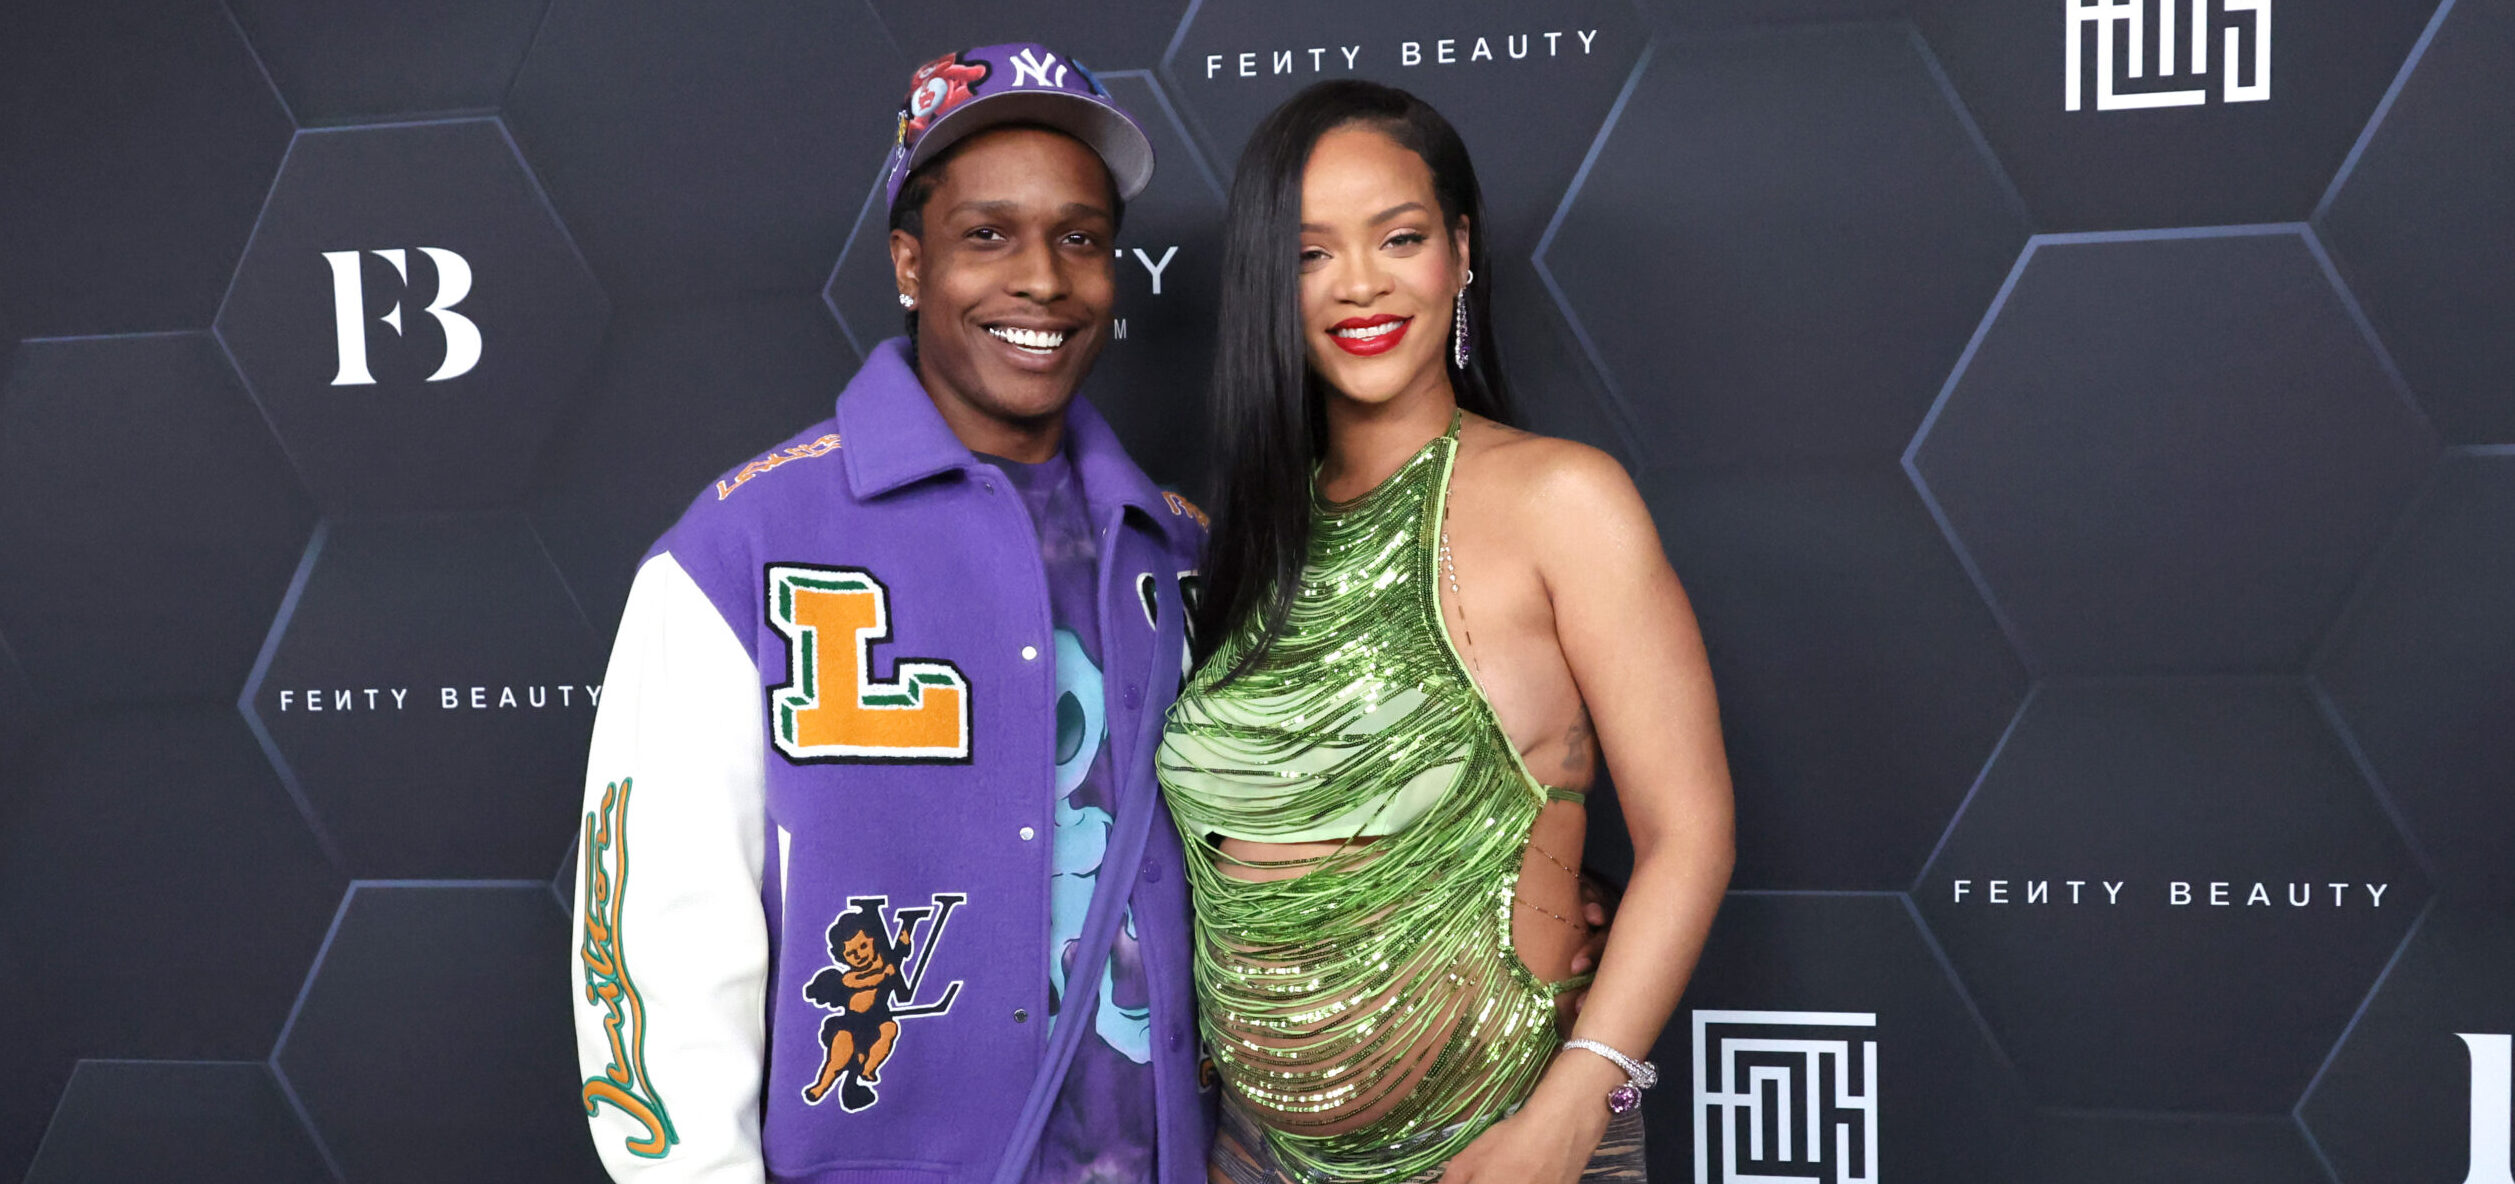 A$AP Rocky Says He Hopes To Raise An ‘Open-Minded Child’ With Girlfriend Rihanna